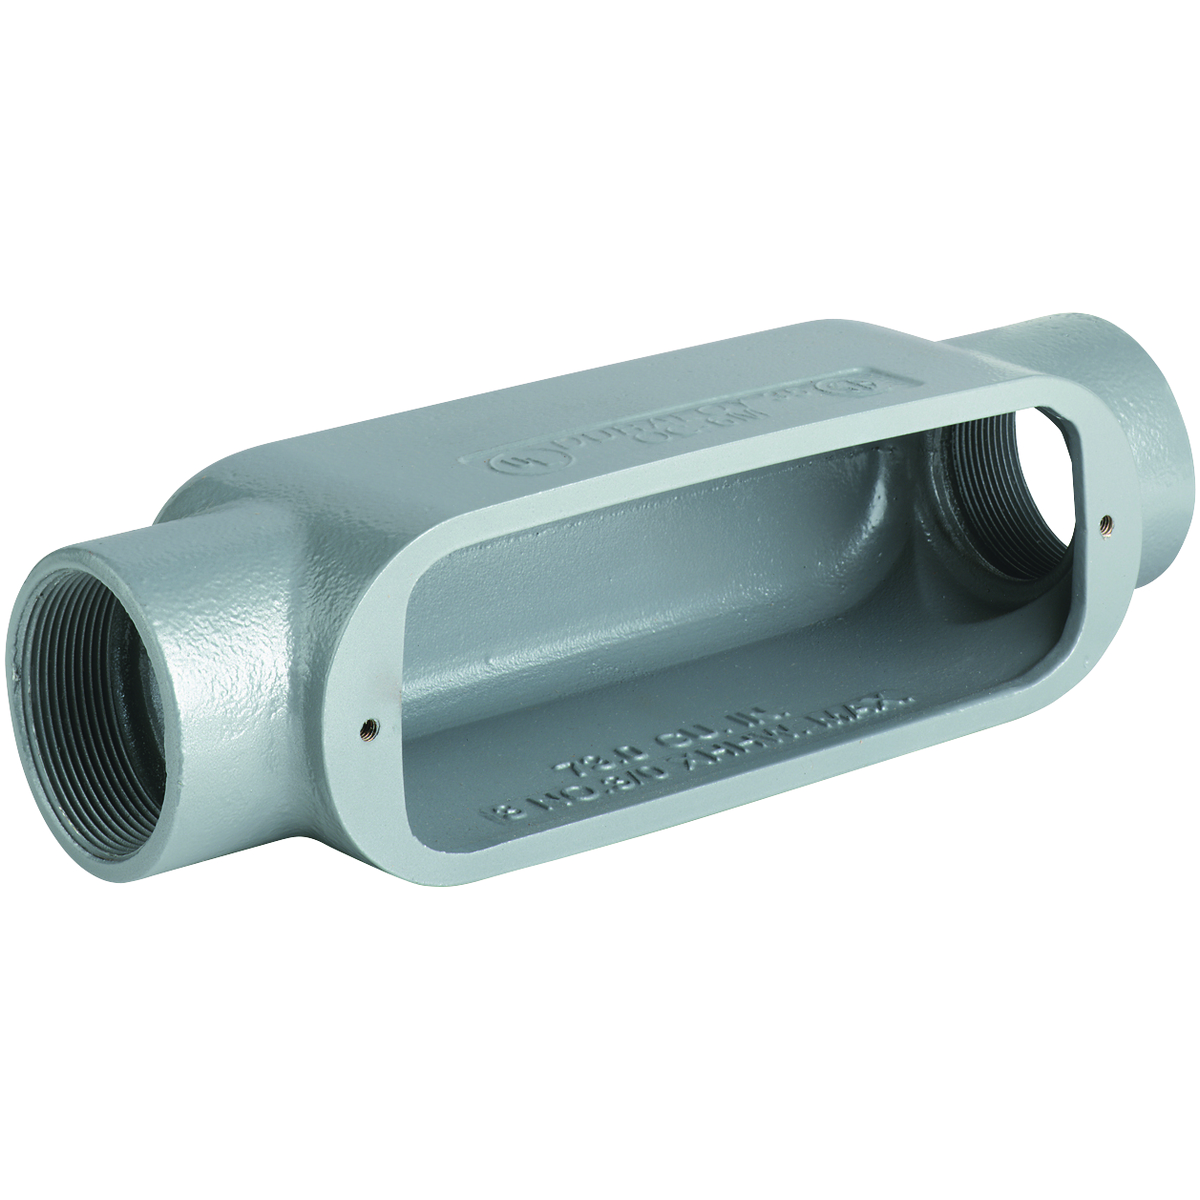 O SERIES/DURALOY 5 SERIES - ALUMINUM CONDUIT BODY - C TYPE - HUB SIZE3-1/2 INCH - VOLUME 290.0 CUBIC INCHES